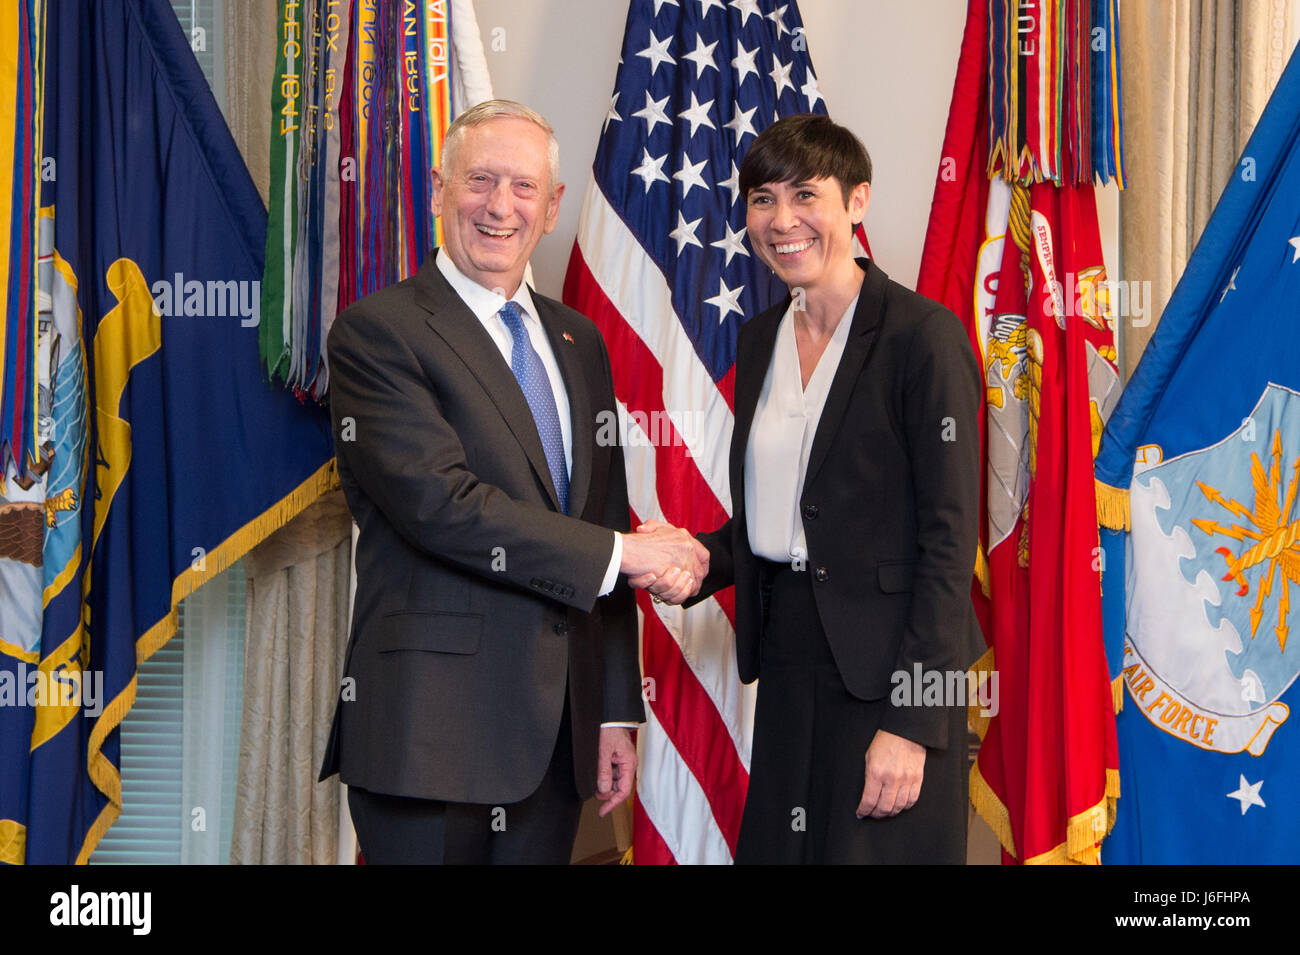 Defense Secretary Jim Mattis stands with Norway’s Minister of Defence Ine Eriksen Søreide before a meeting at the Pentagon in Washington, D.C., May 17, 2017. (DOD photo by U.S. Army Sgt. Amber I. Smith) Stock Photo